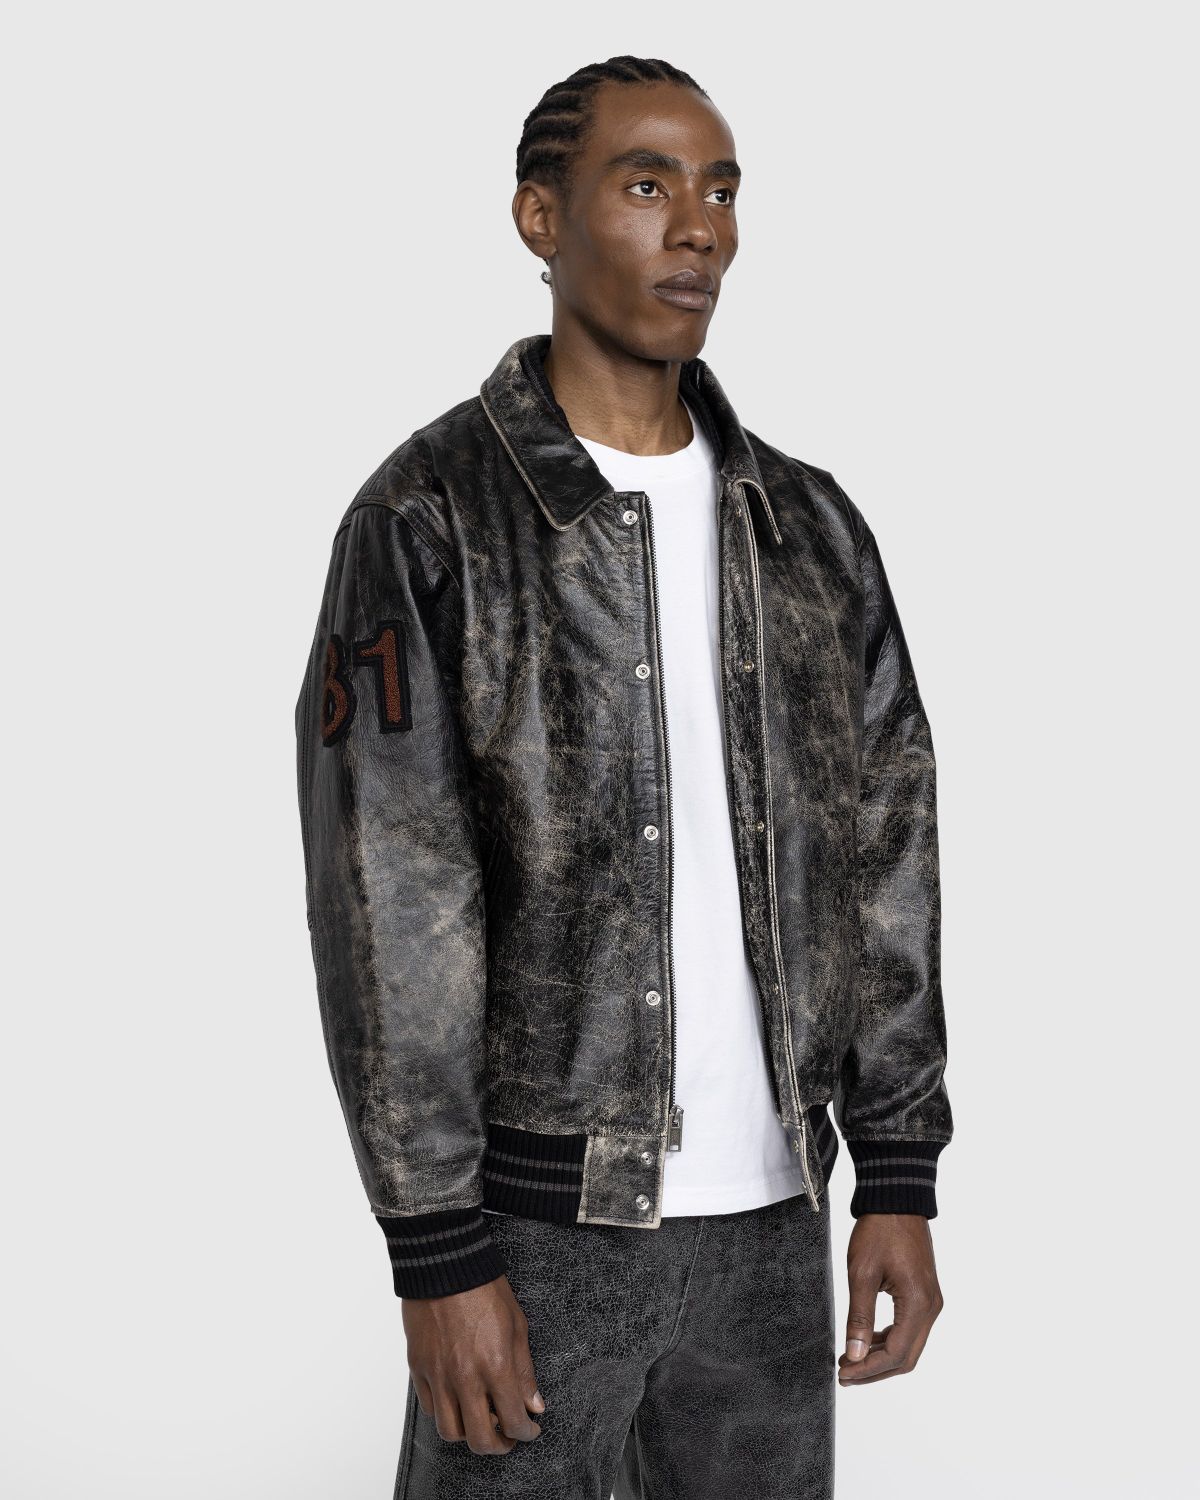 Guess USA – Distressed Leather Letterman Jacket Black | Highsnobiety Shop